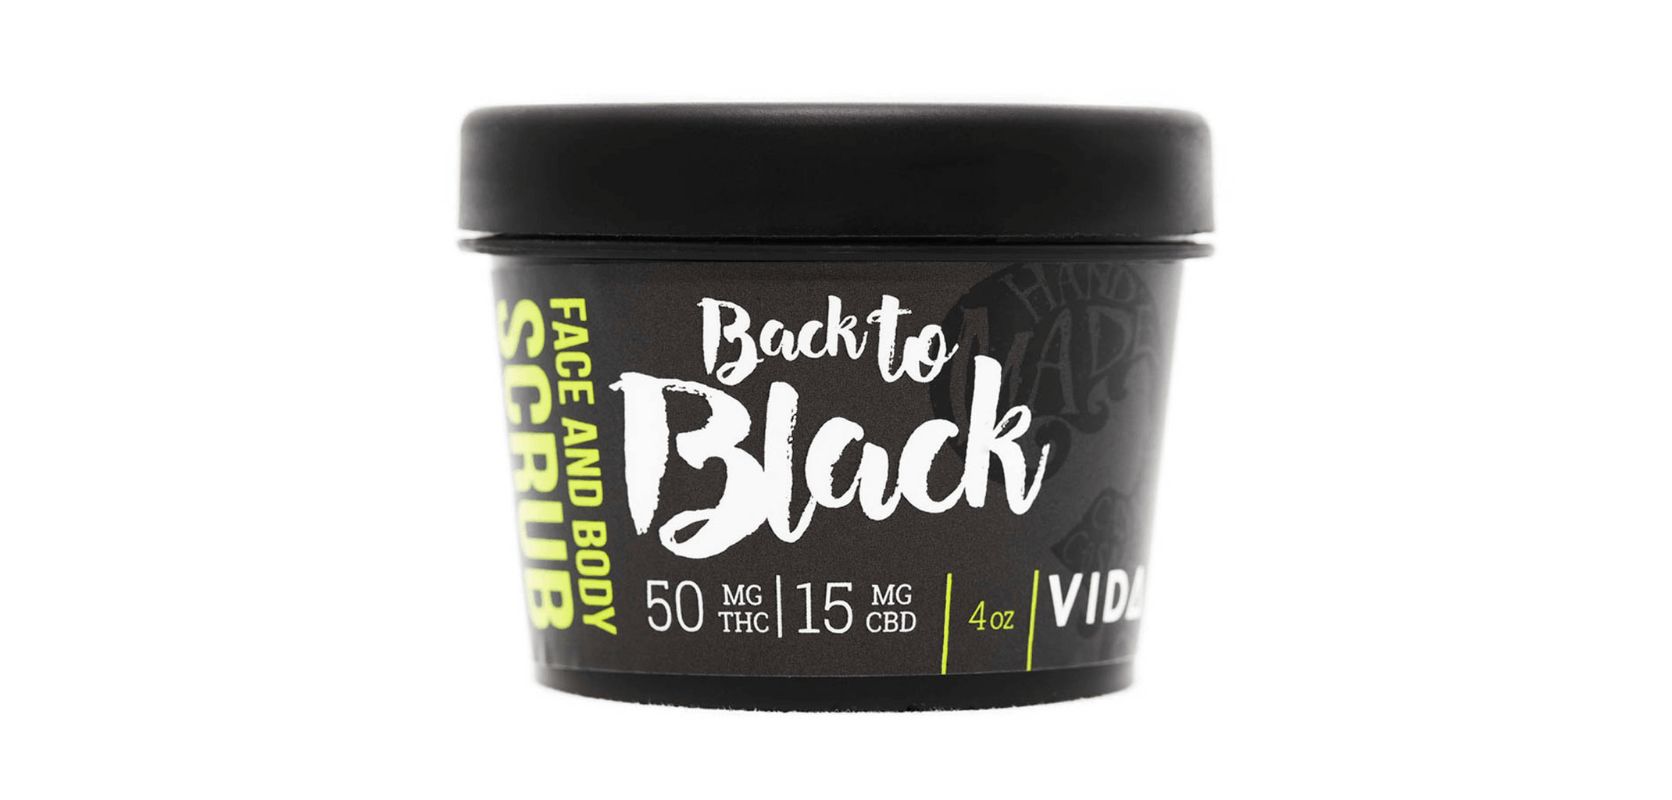 Use this topical with activated charcoal to naturally purify your skin, exfoliate dull skin cells, and feel refreshed. Buy some today for only $15.